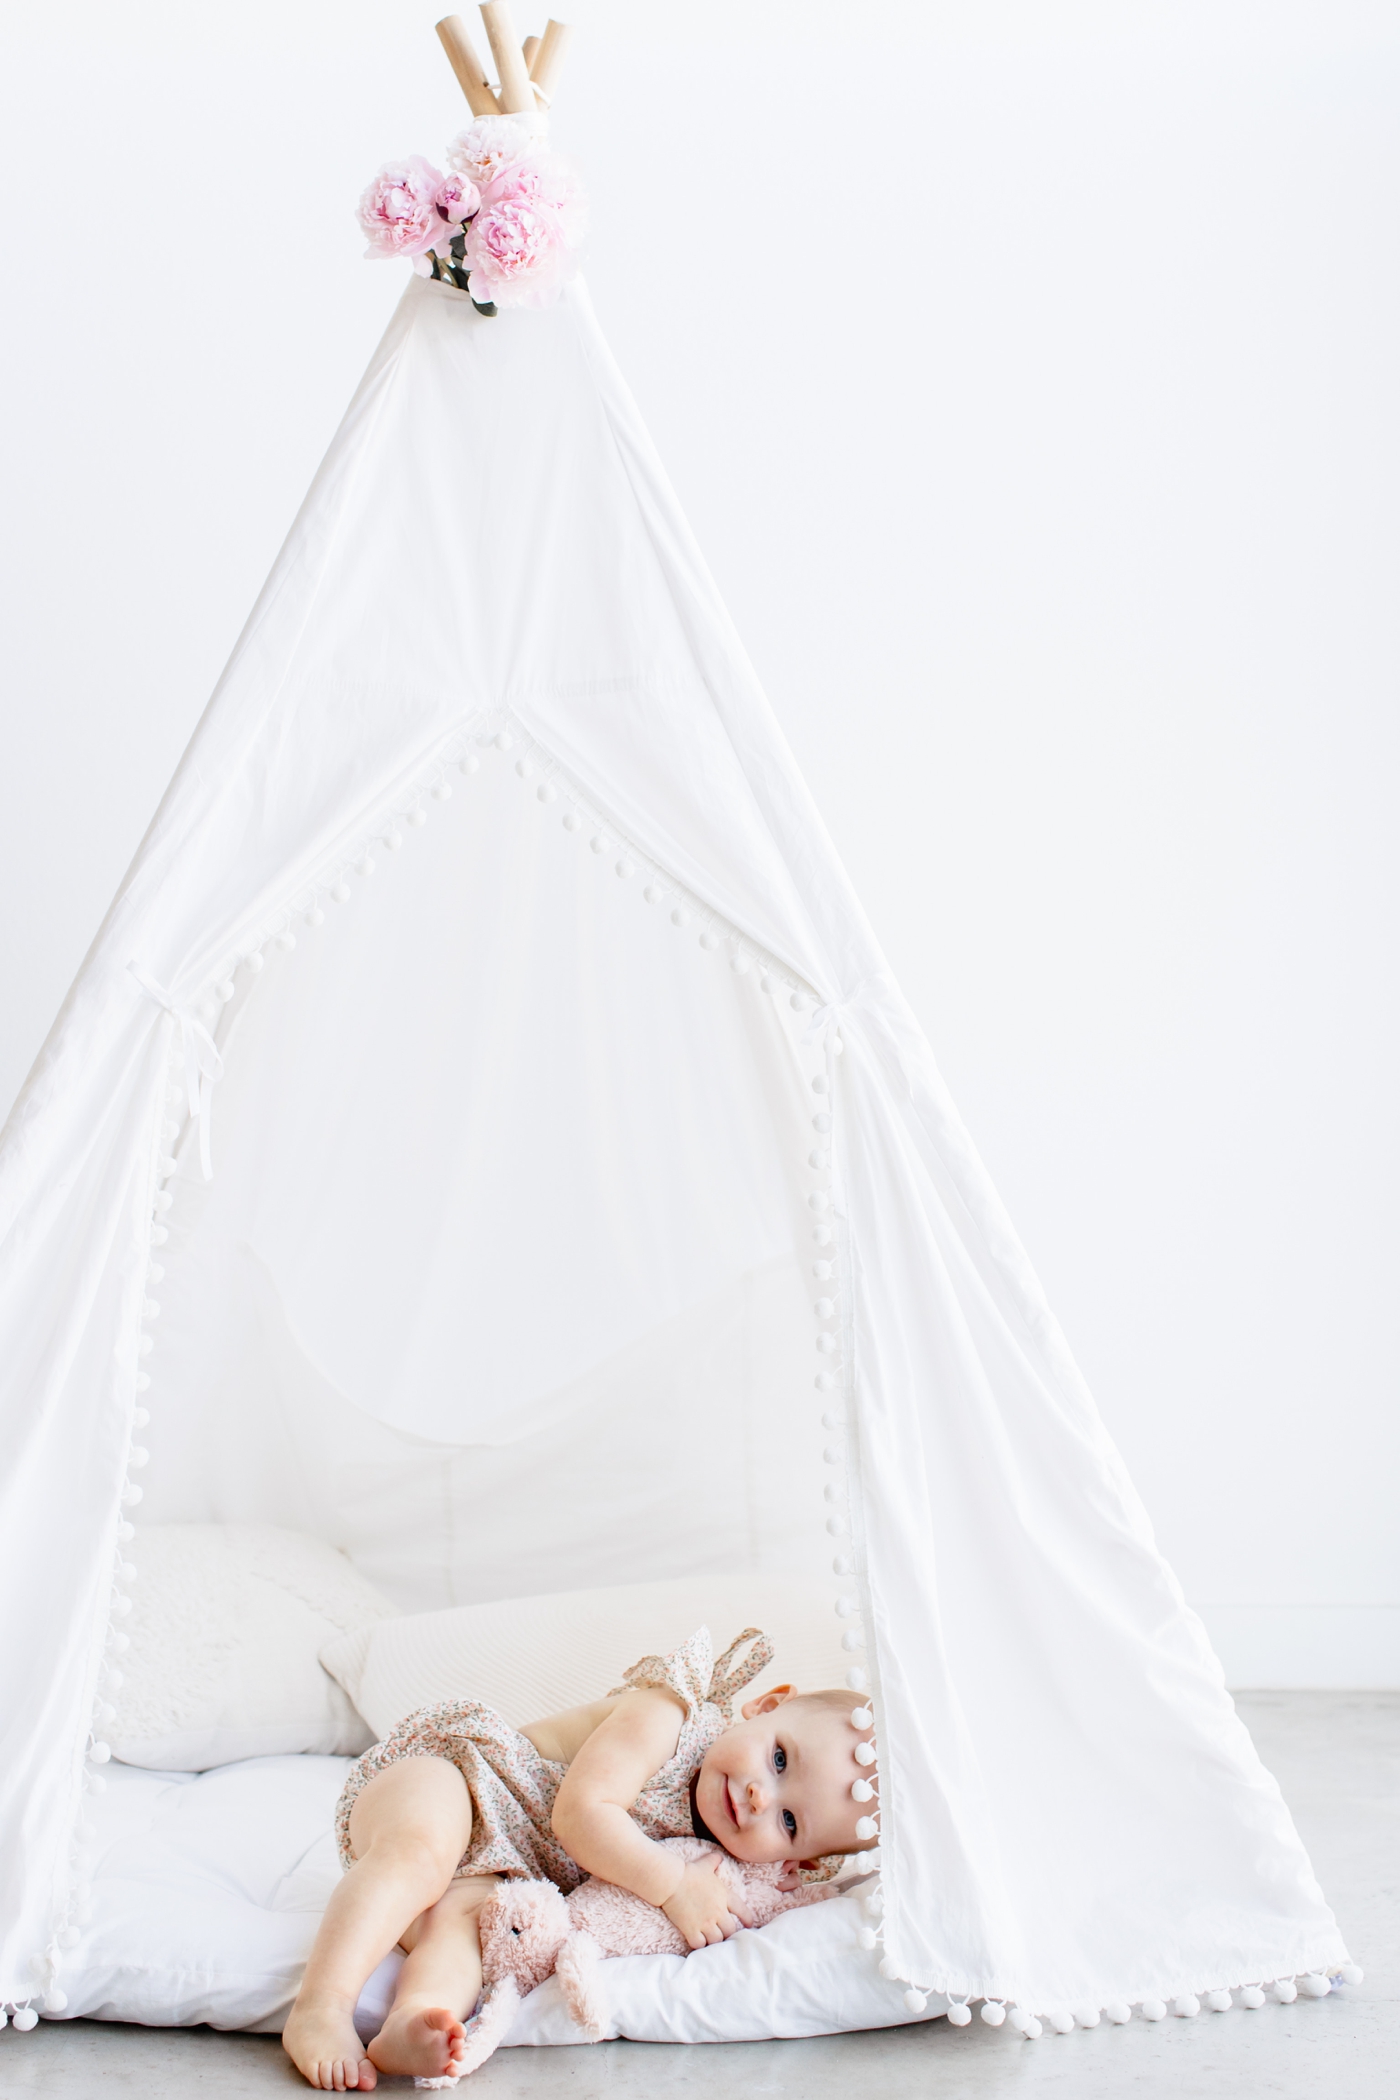 Sweet girl cuddling her stuffed animal in a teepee provided by Austin family photographer, Sana Ahmed Photography.